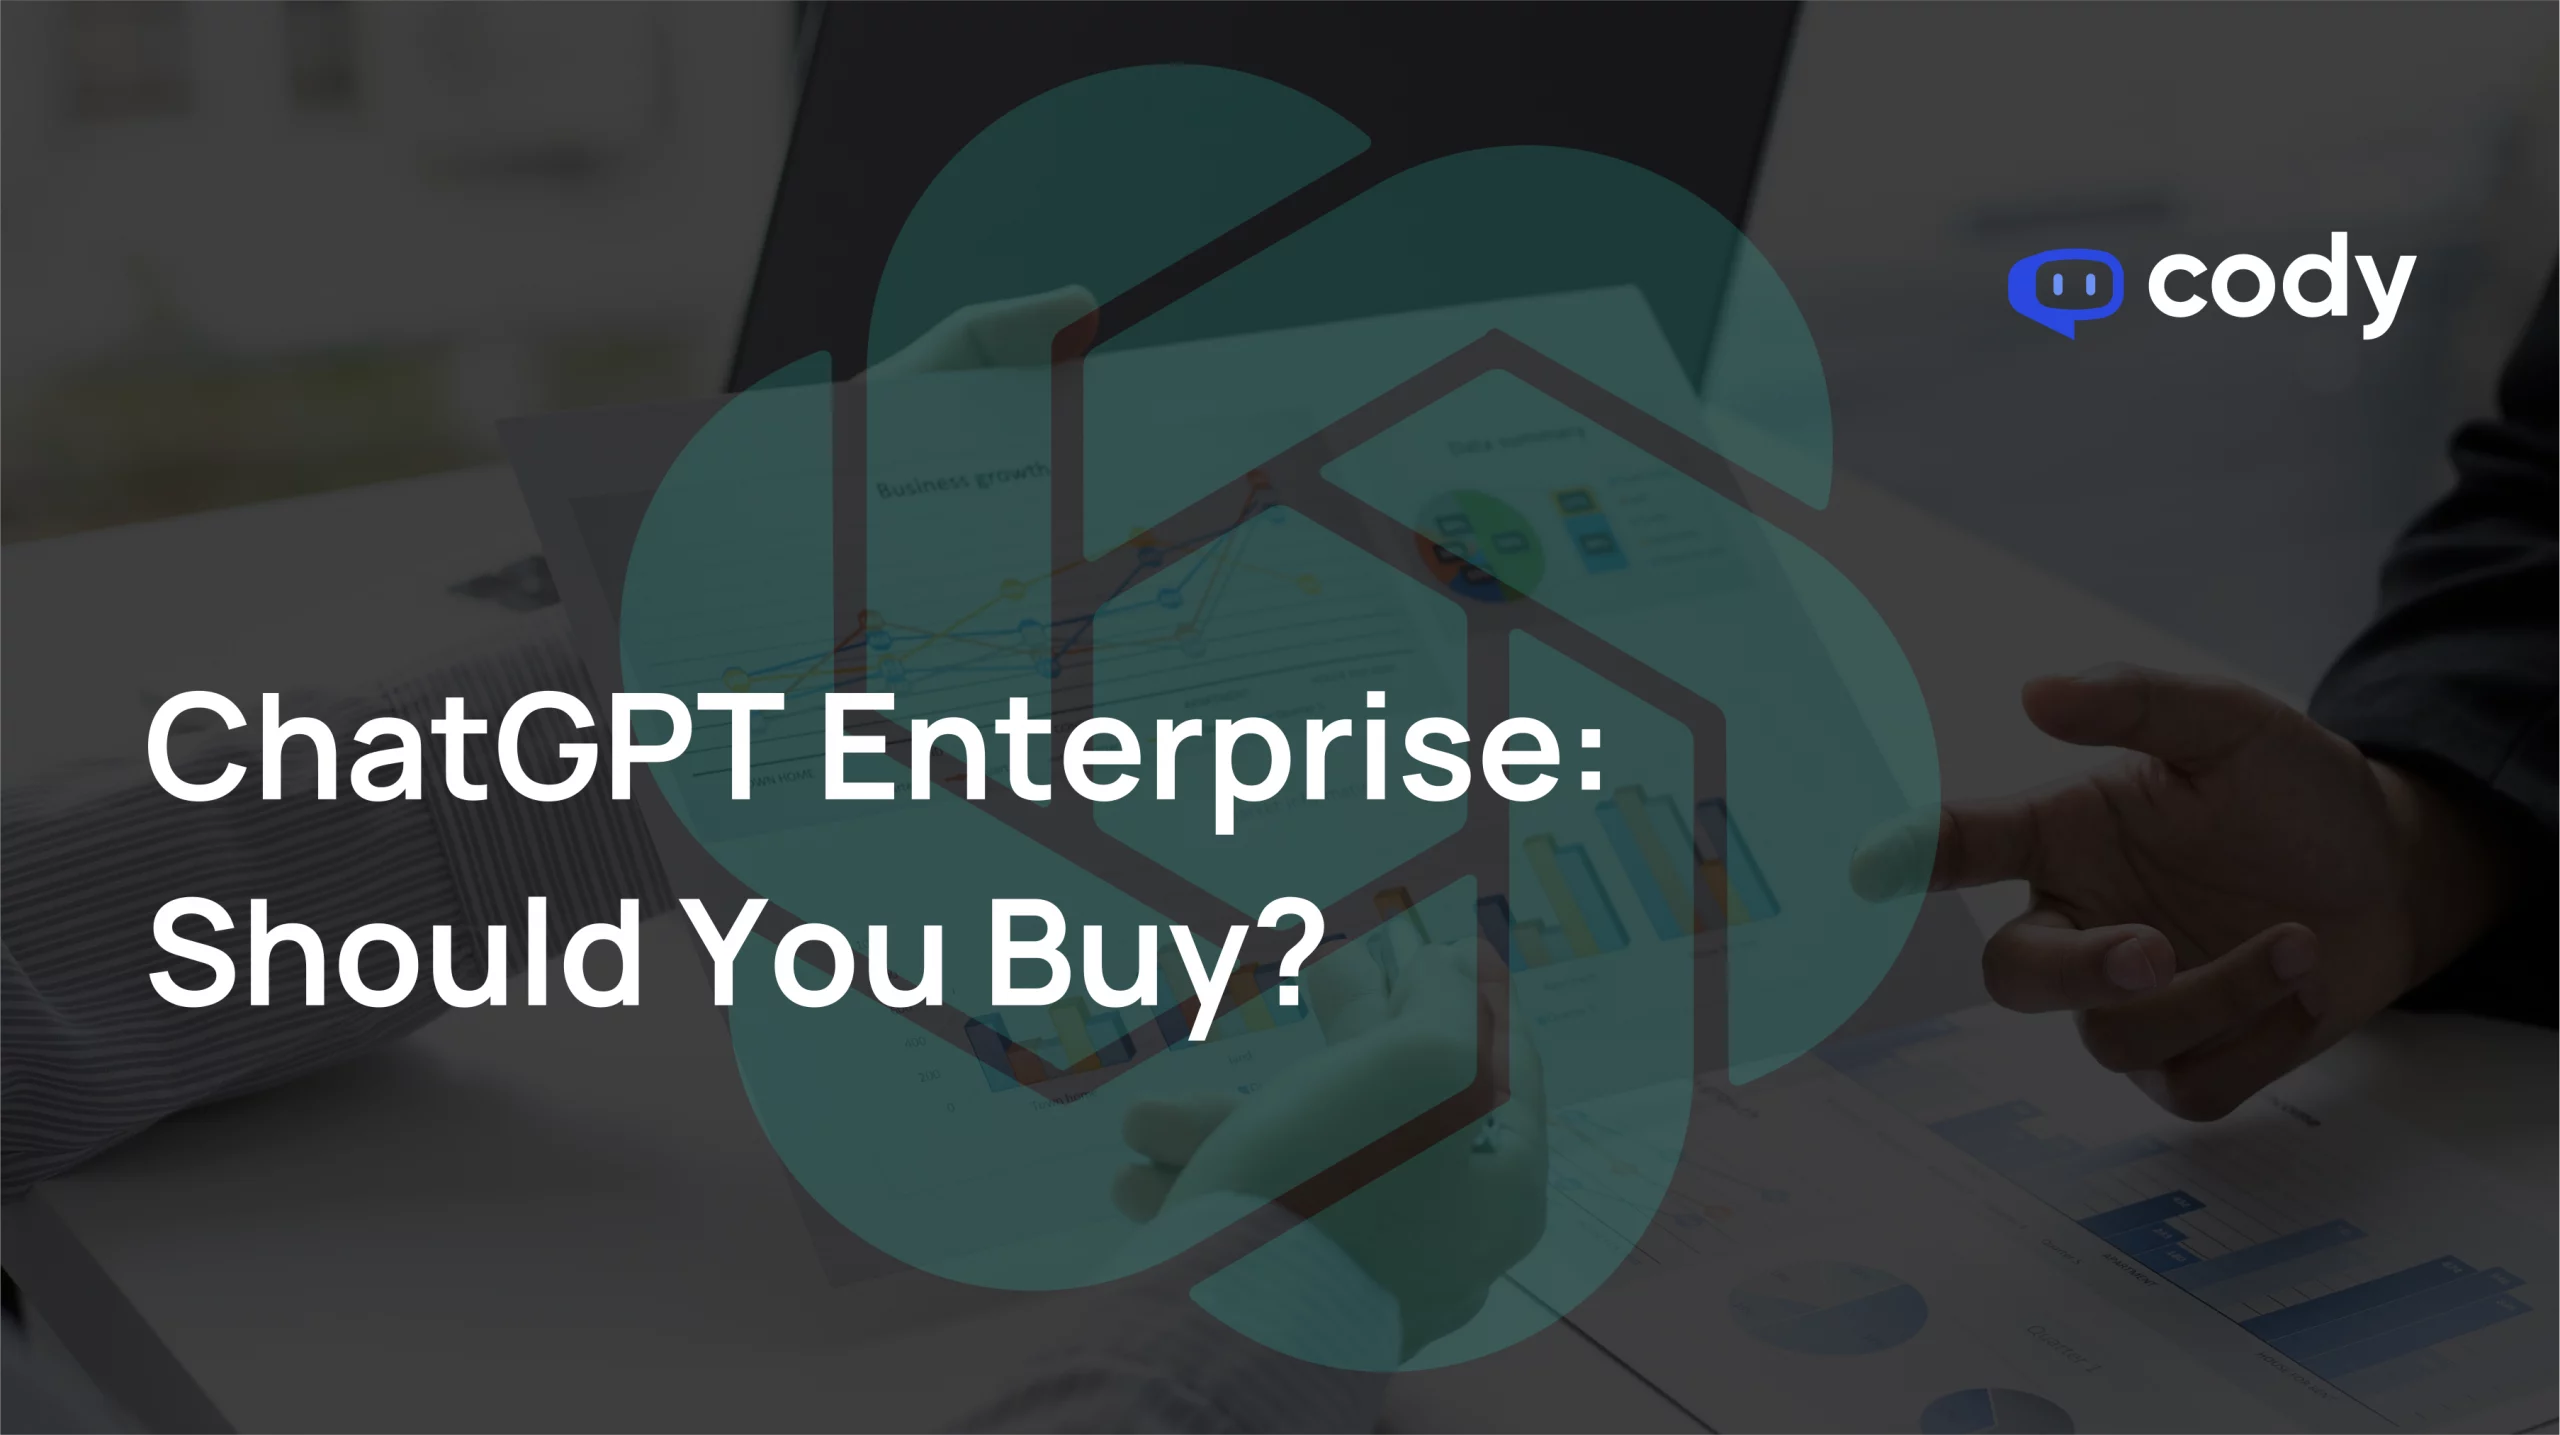 Canva, Carlyle, The Estée Lauder Companies, PwC, and Zapier are reshaping their operations with ChatGPT Enterprise.